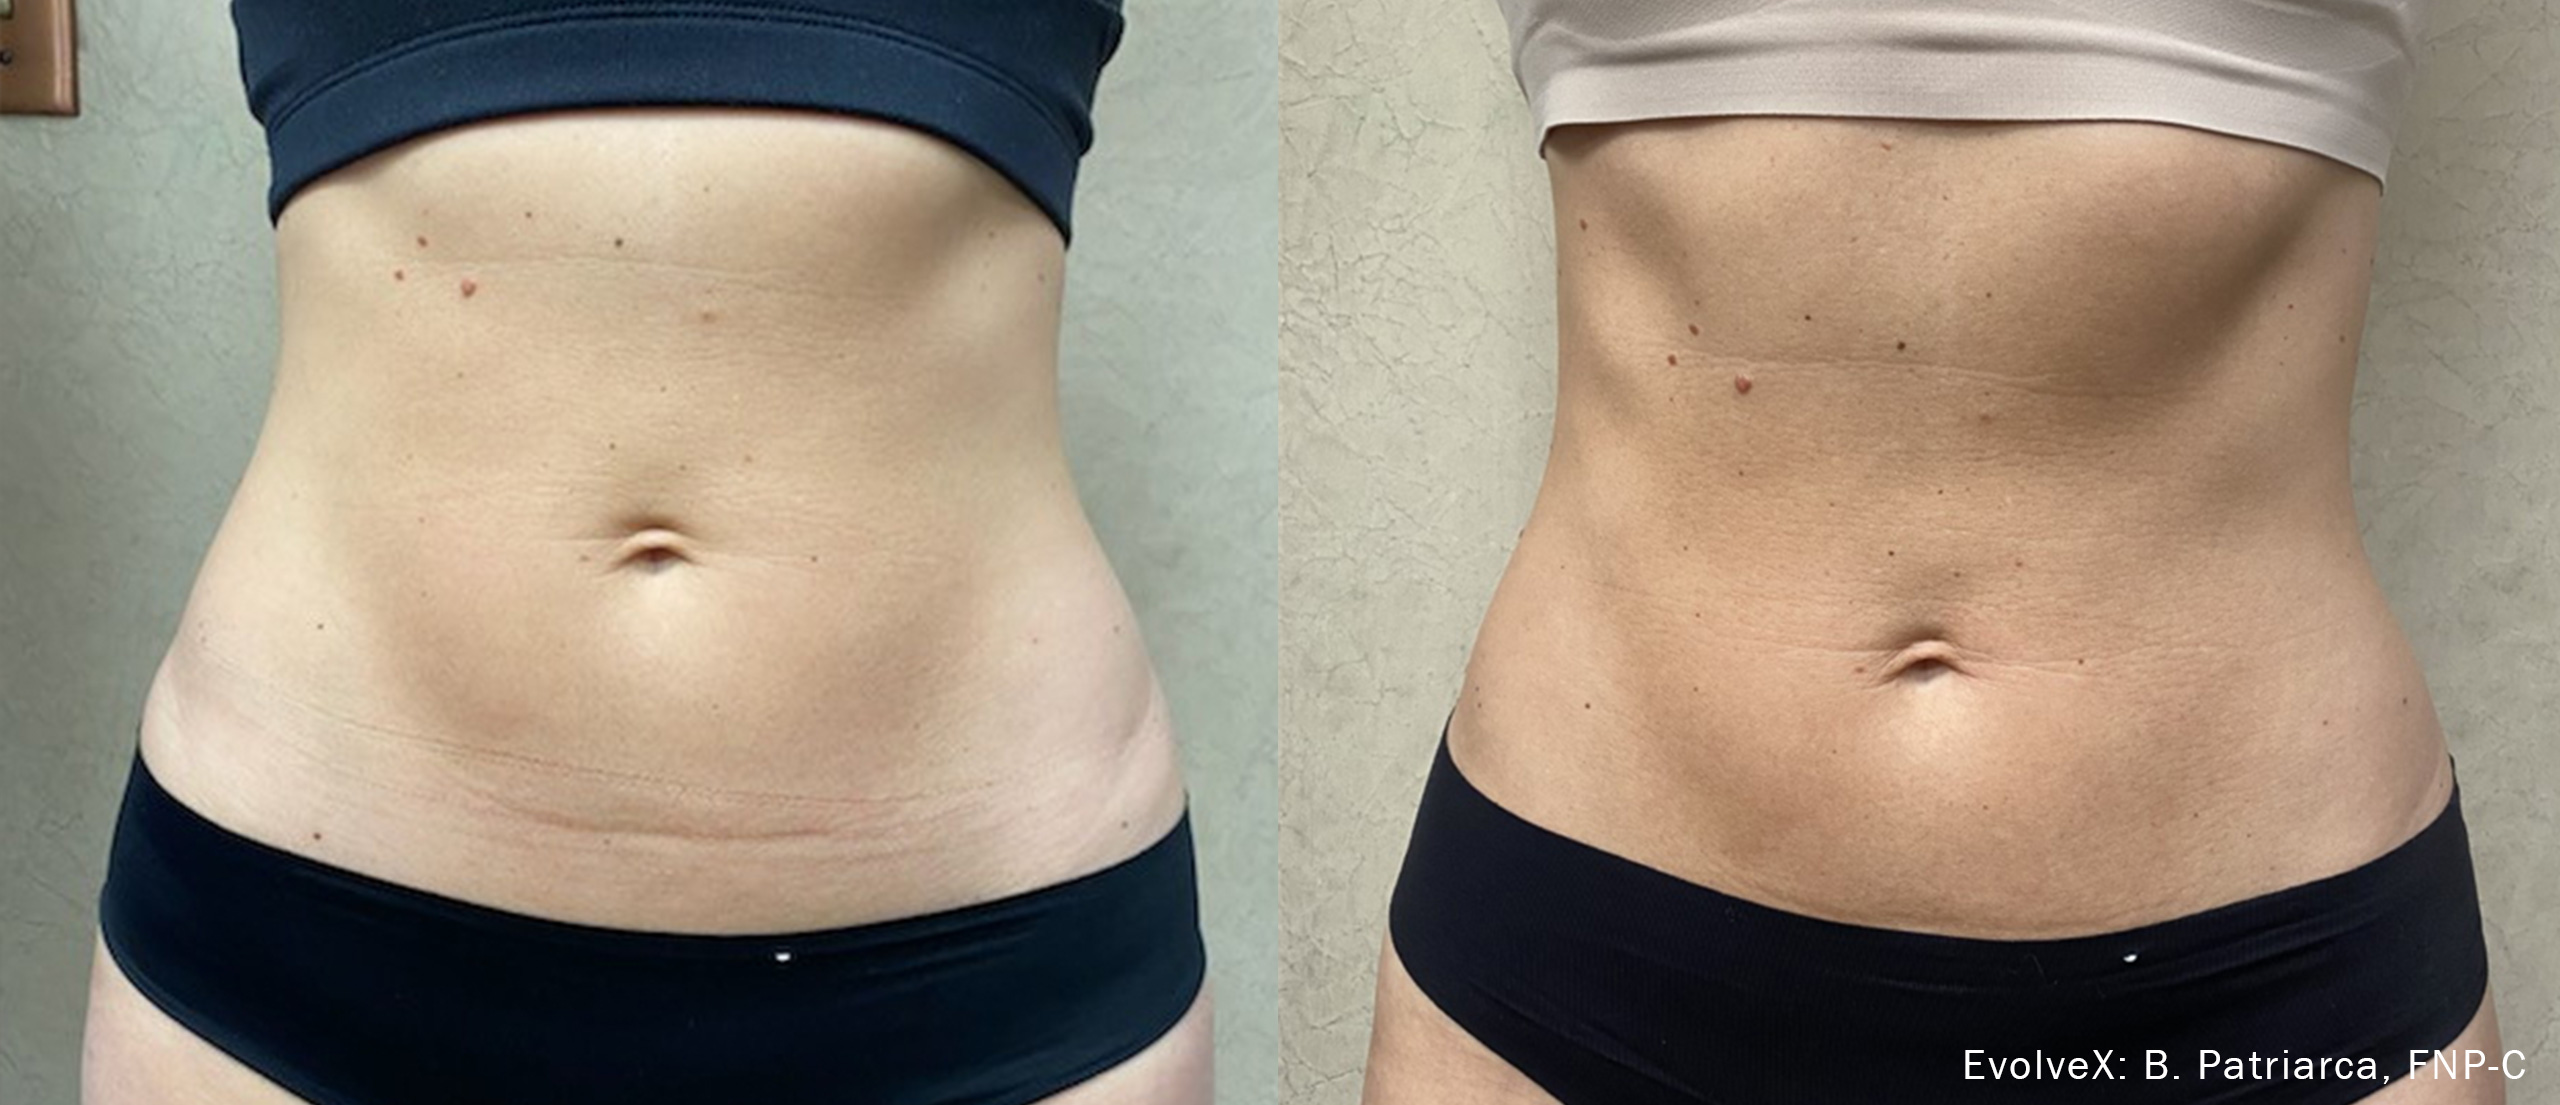  EvolveX Before and After Abs